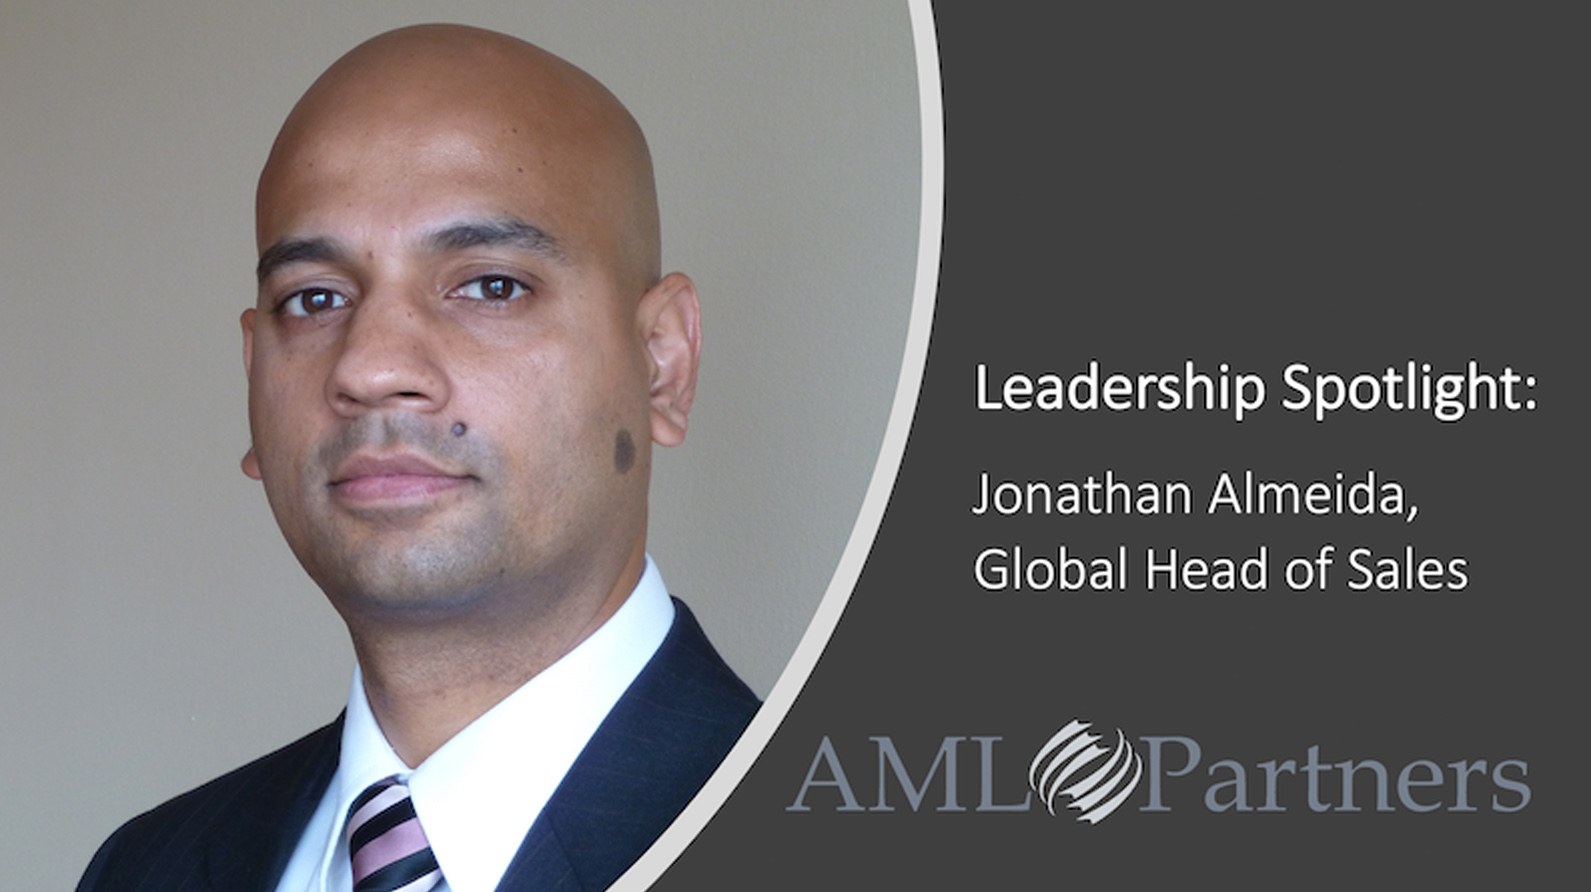 Image of Jonathan Almeida, co-founder and head of global sales of AML Partners. The text: Leadership Spotlight and the AML Partners logo.